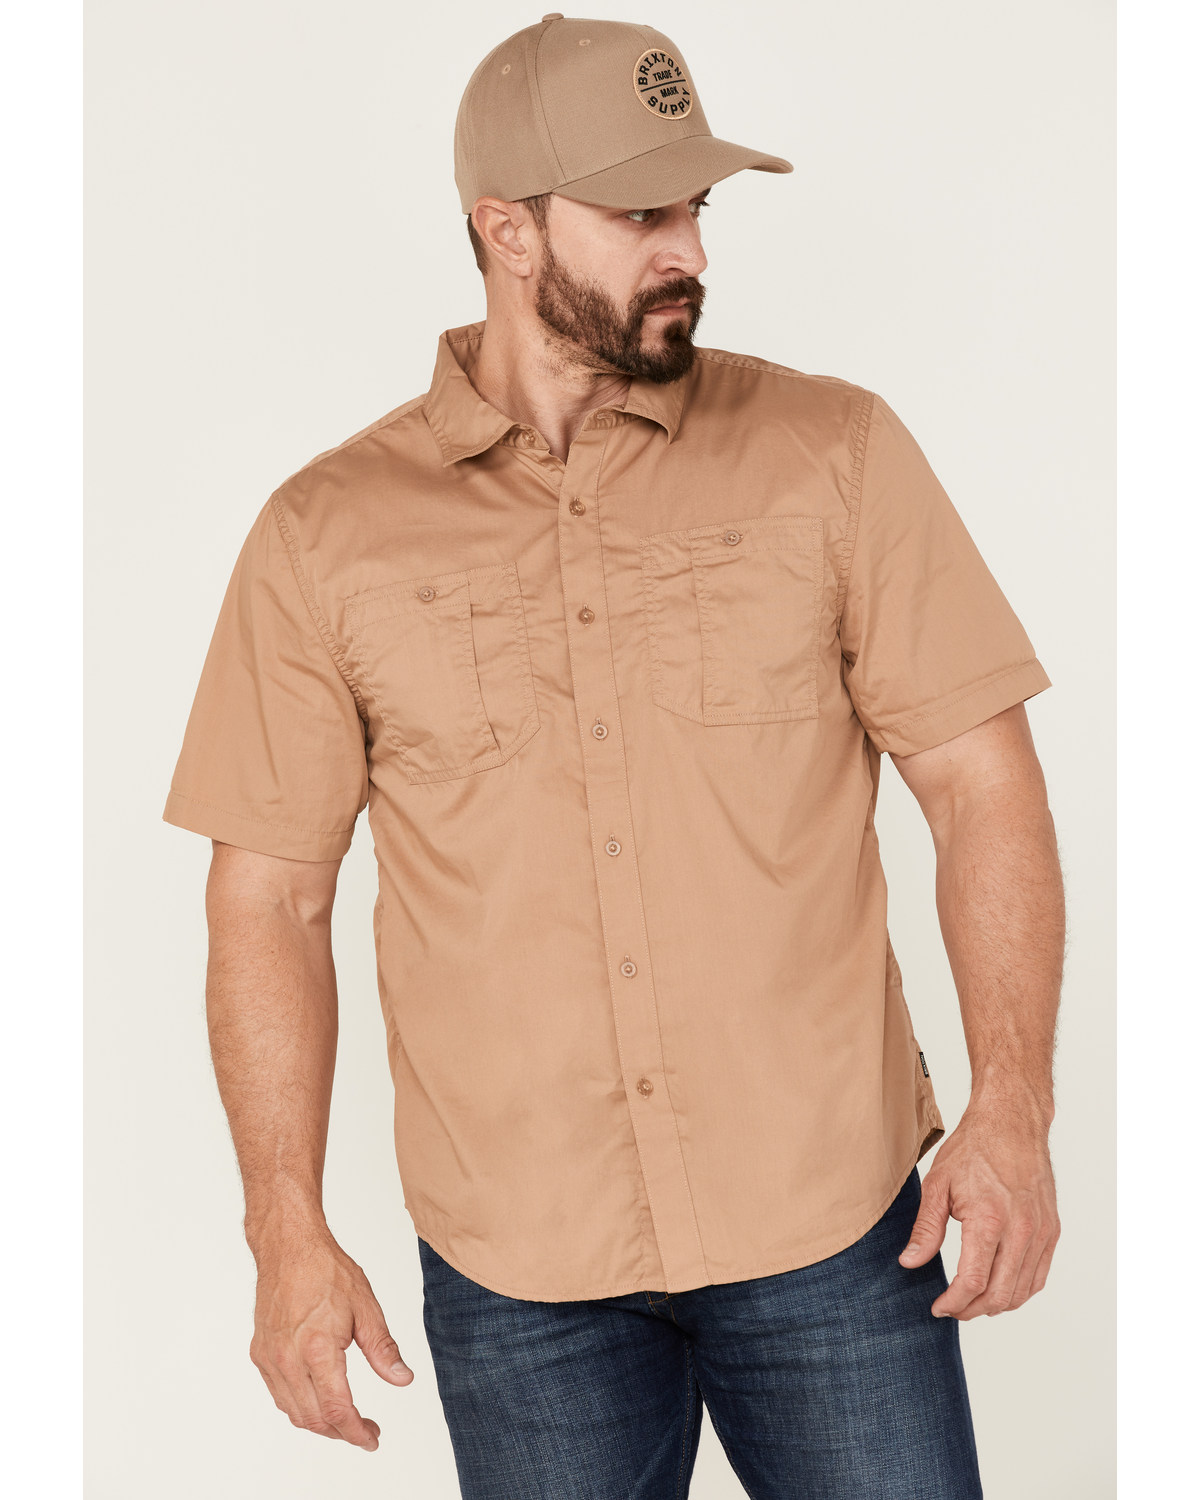 Brixton Men's Mojave Charter Solid Utility Button Down Western Shirt